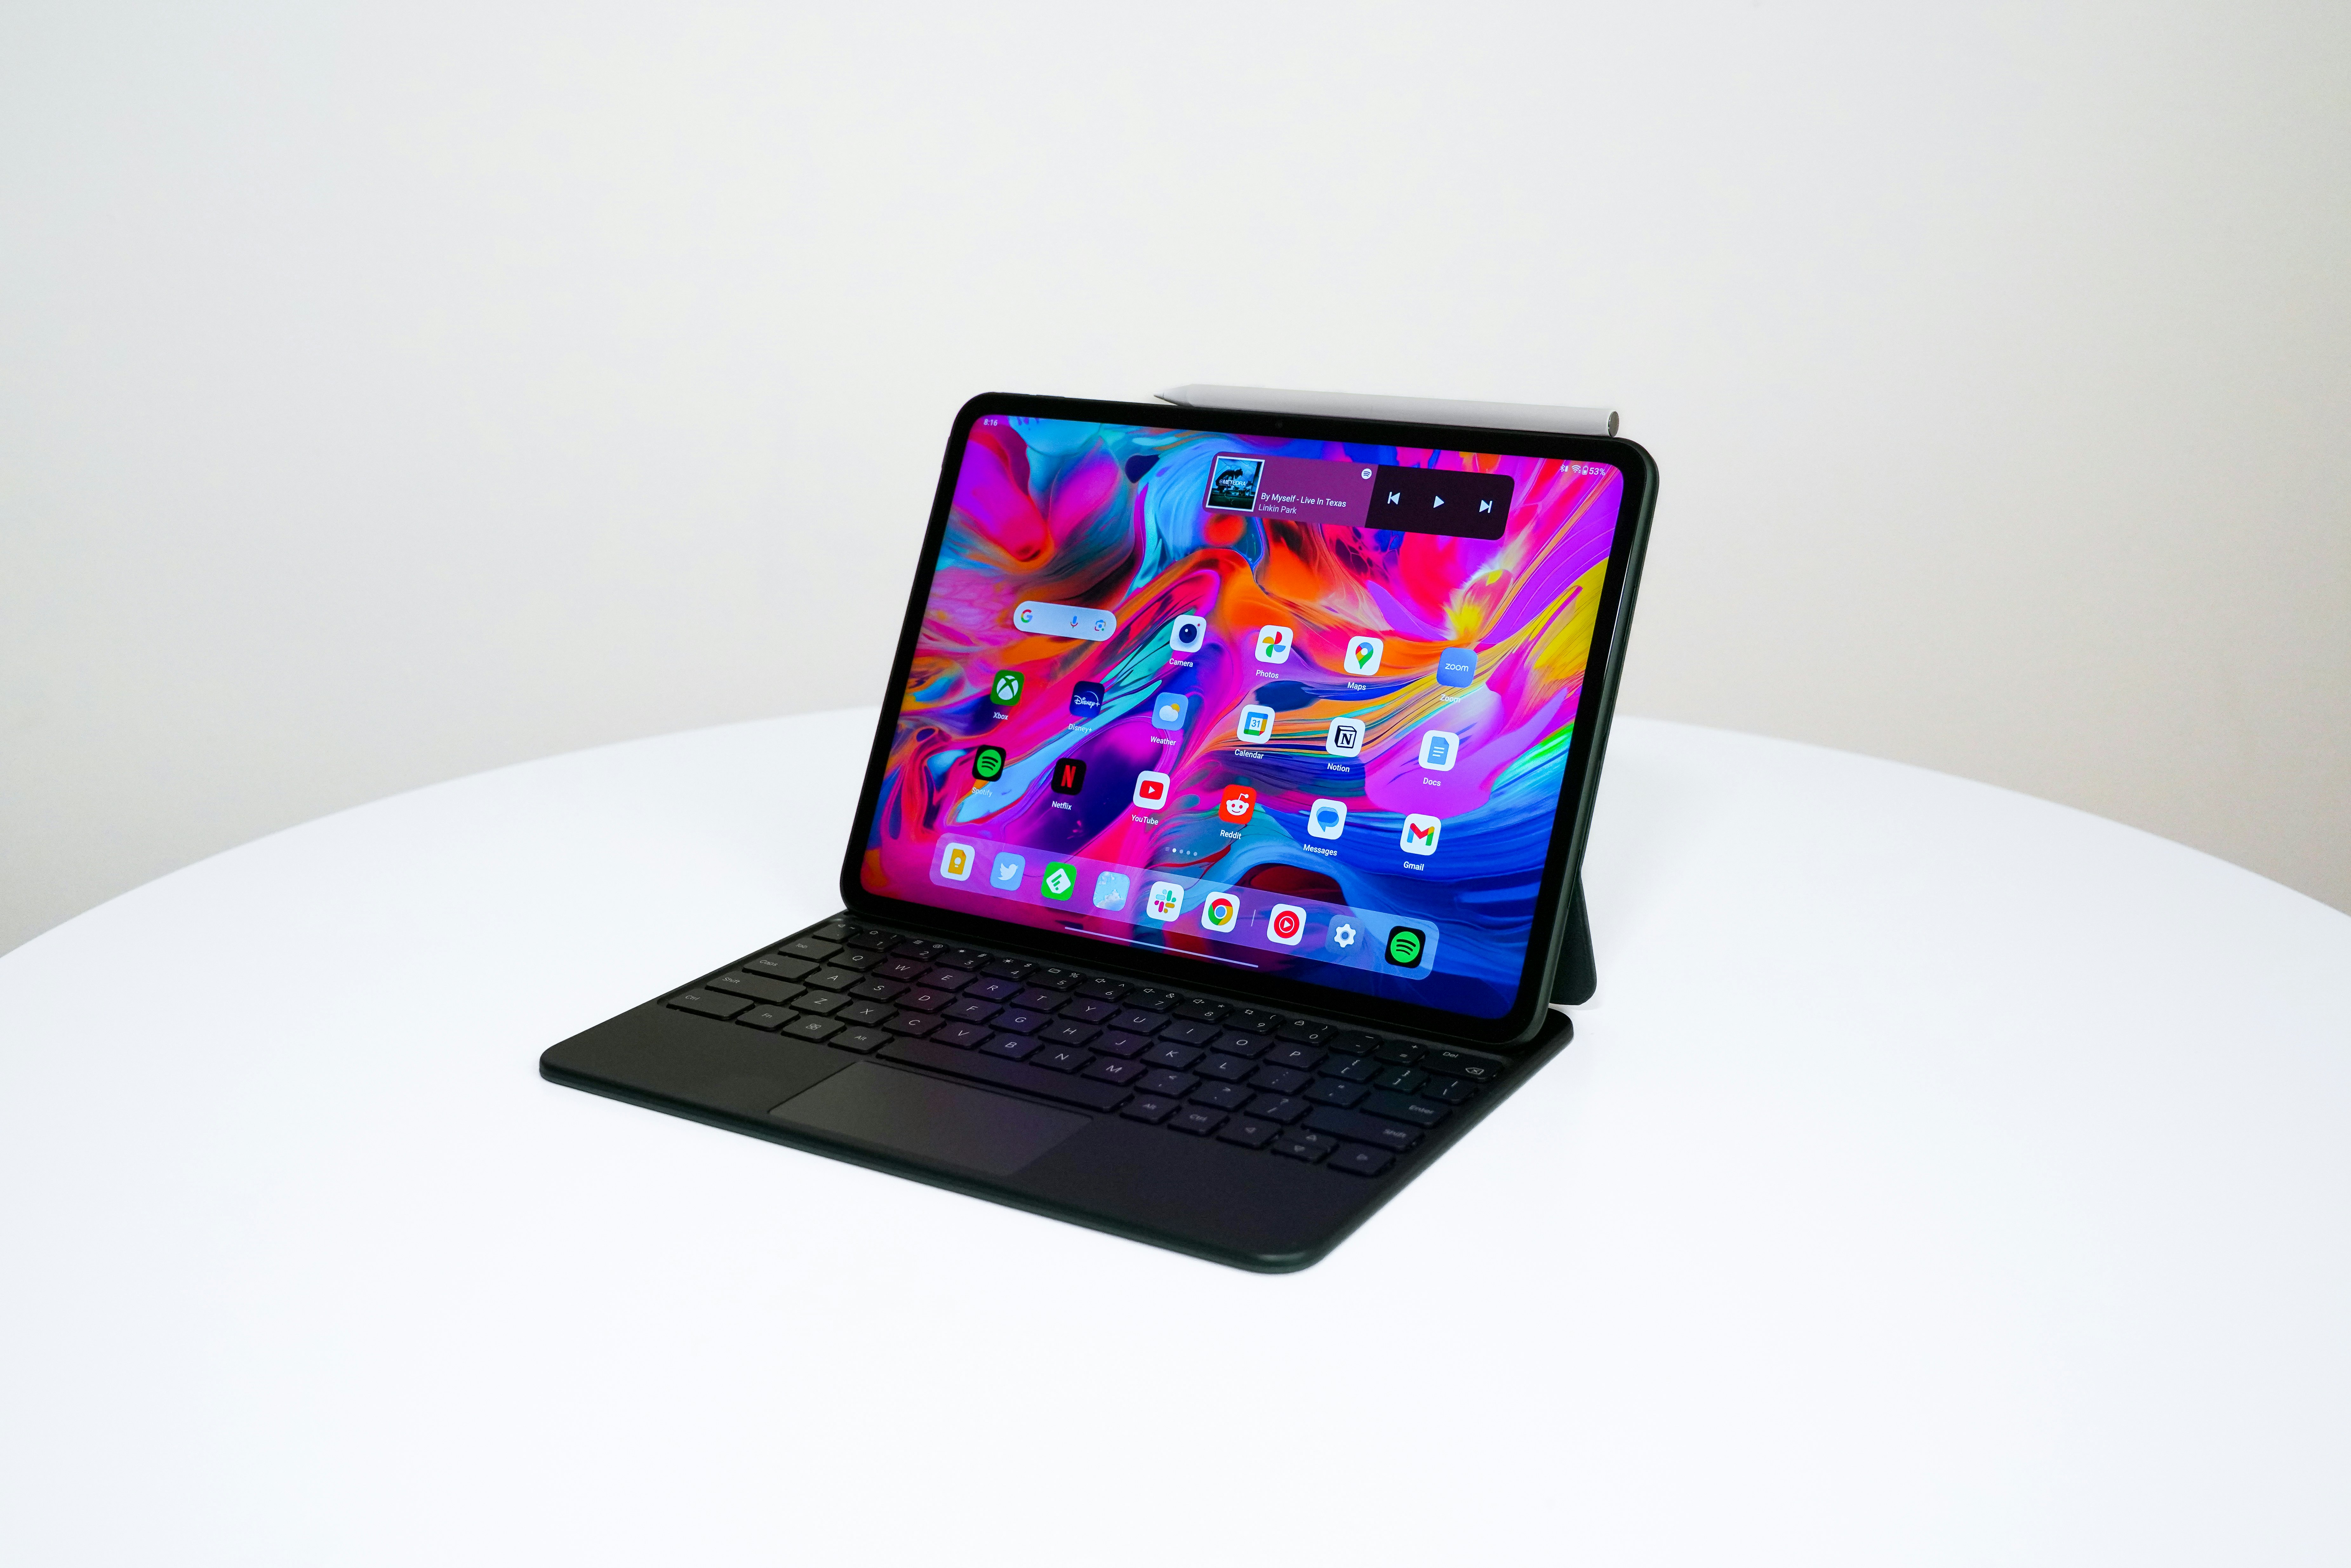 OnePlus Pad Review: Finally, a Great Android Tablet